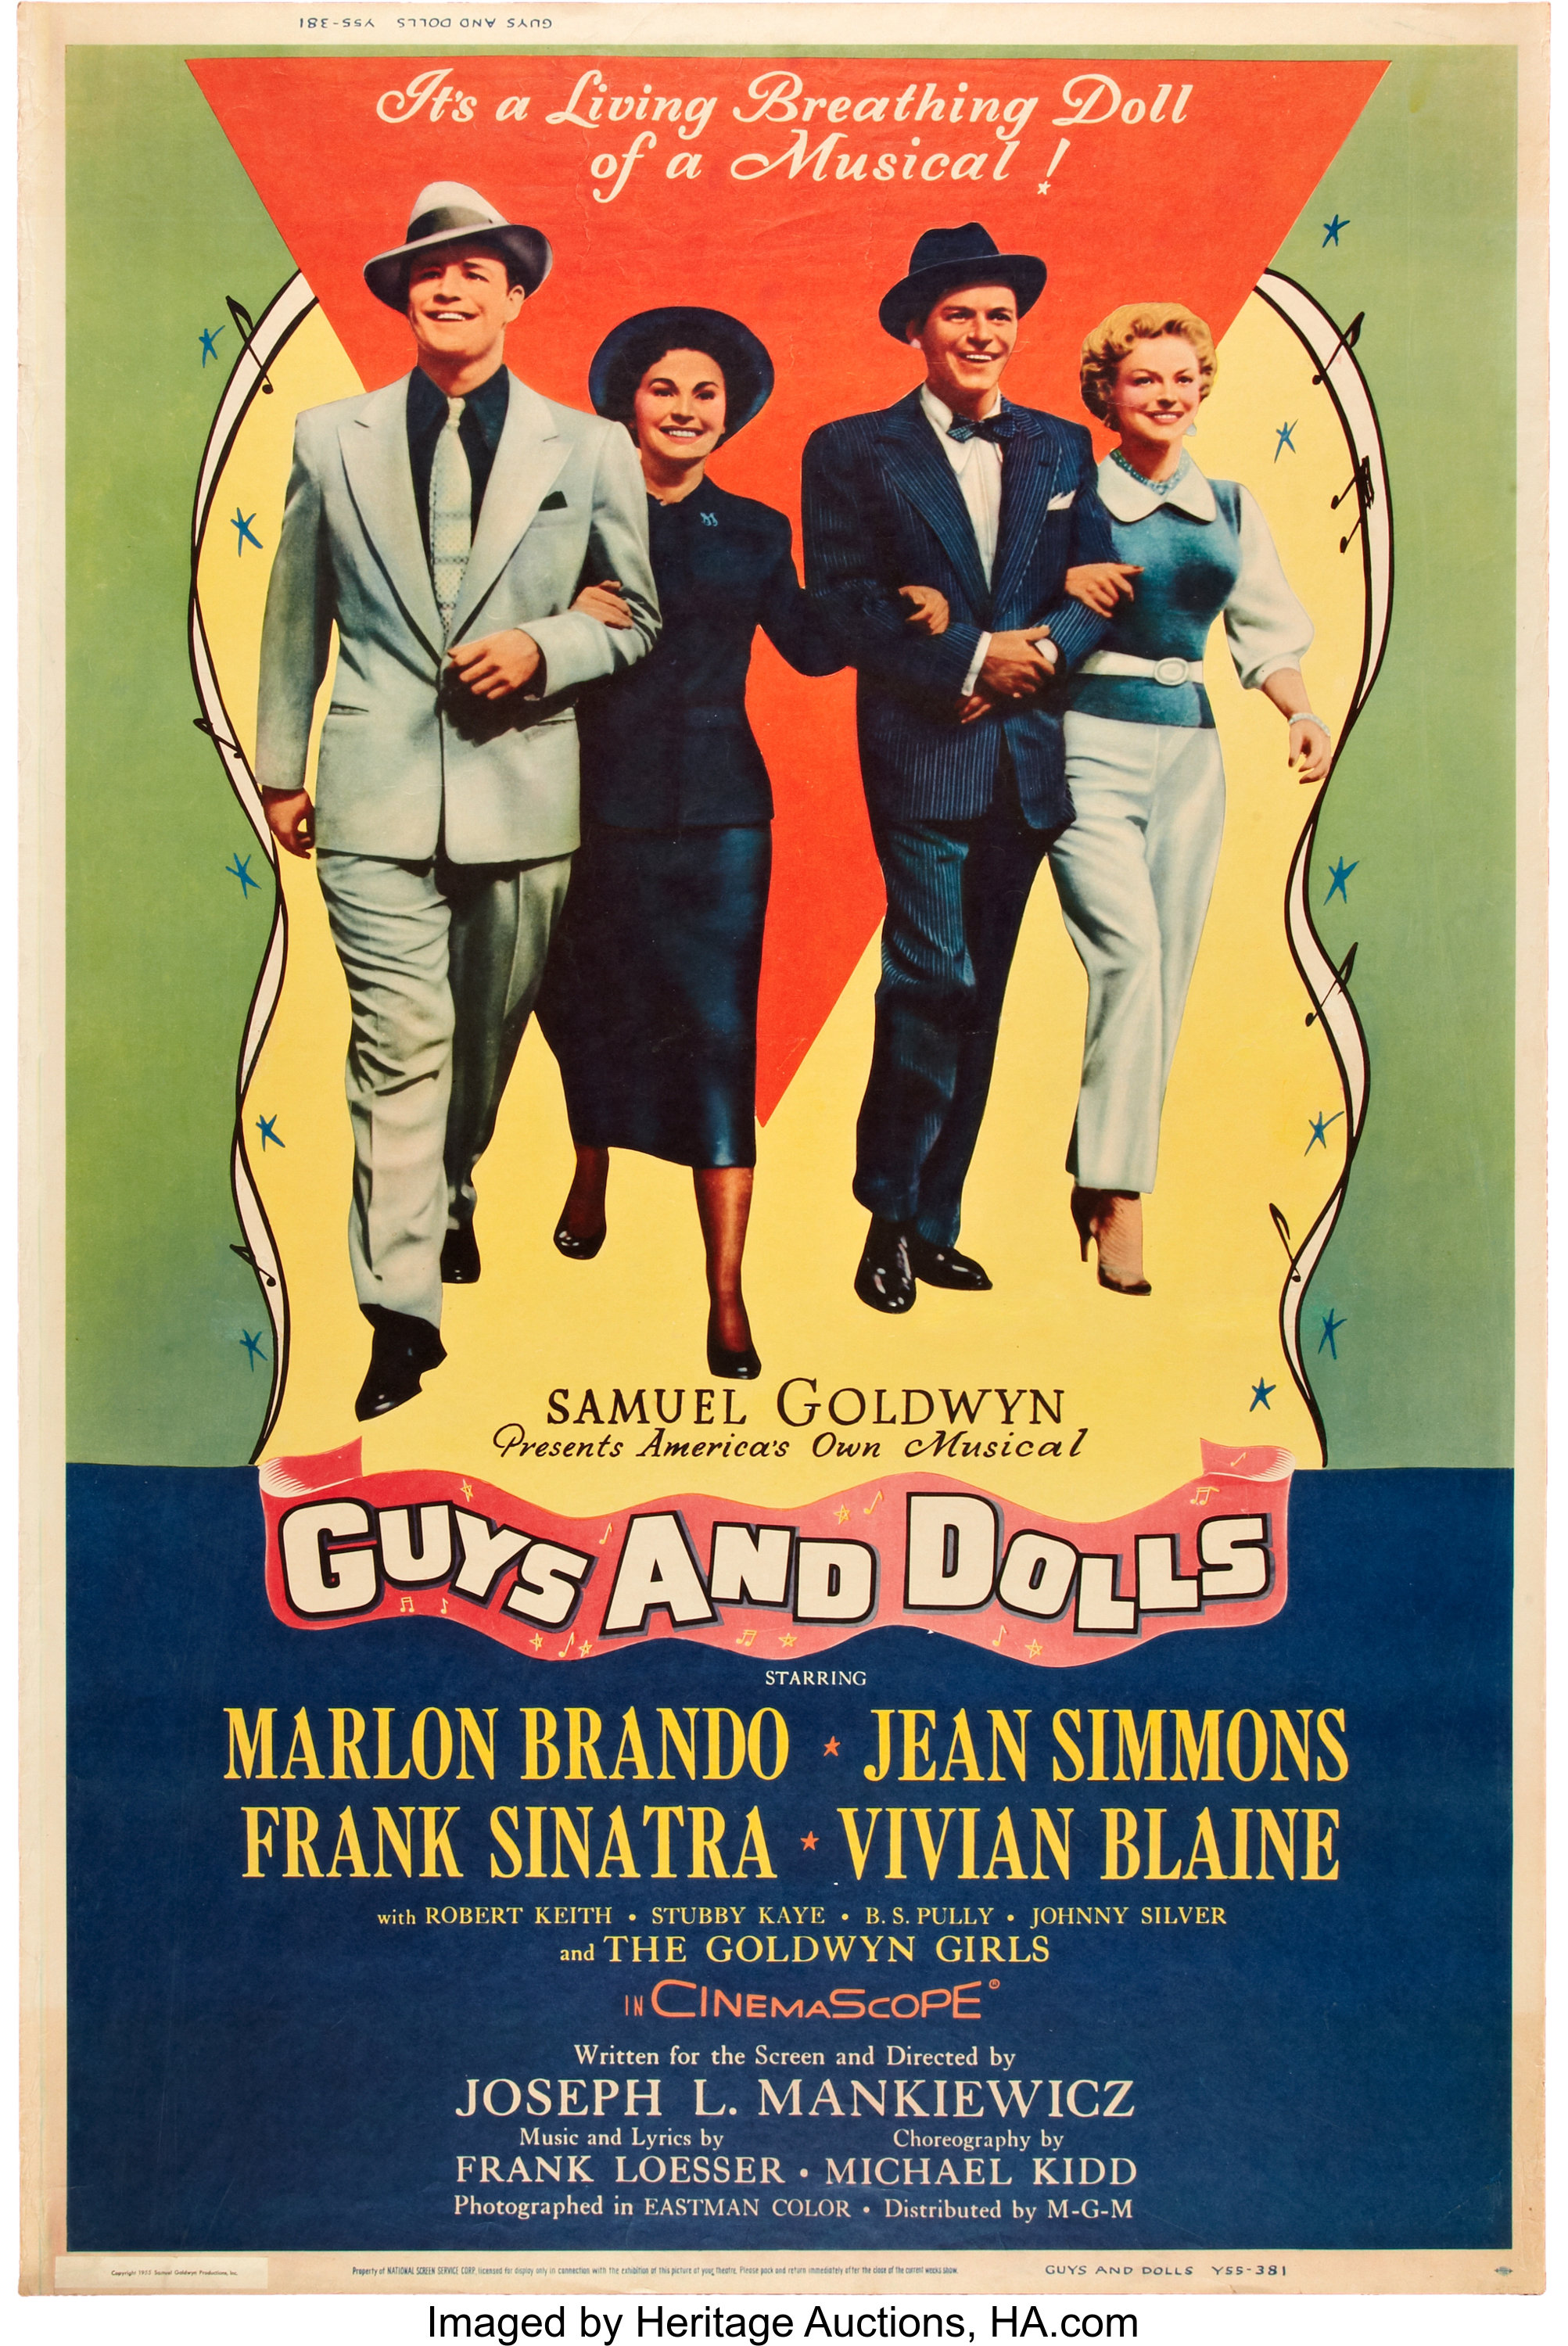 Movie poster for Guys and Dolls with two couples holding hands walking against a multicolor background. 